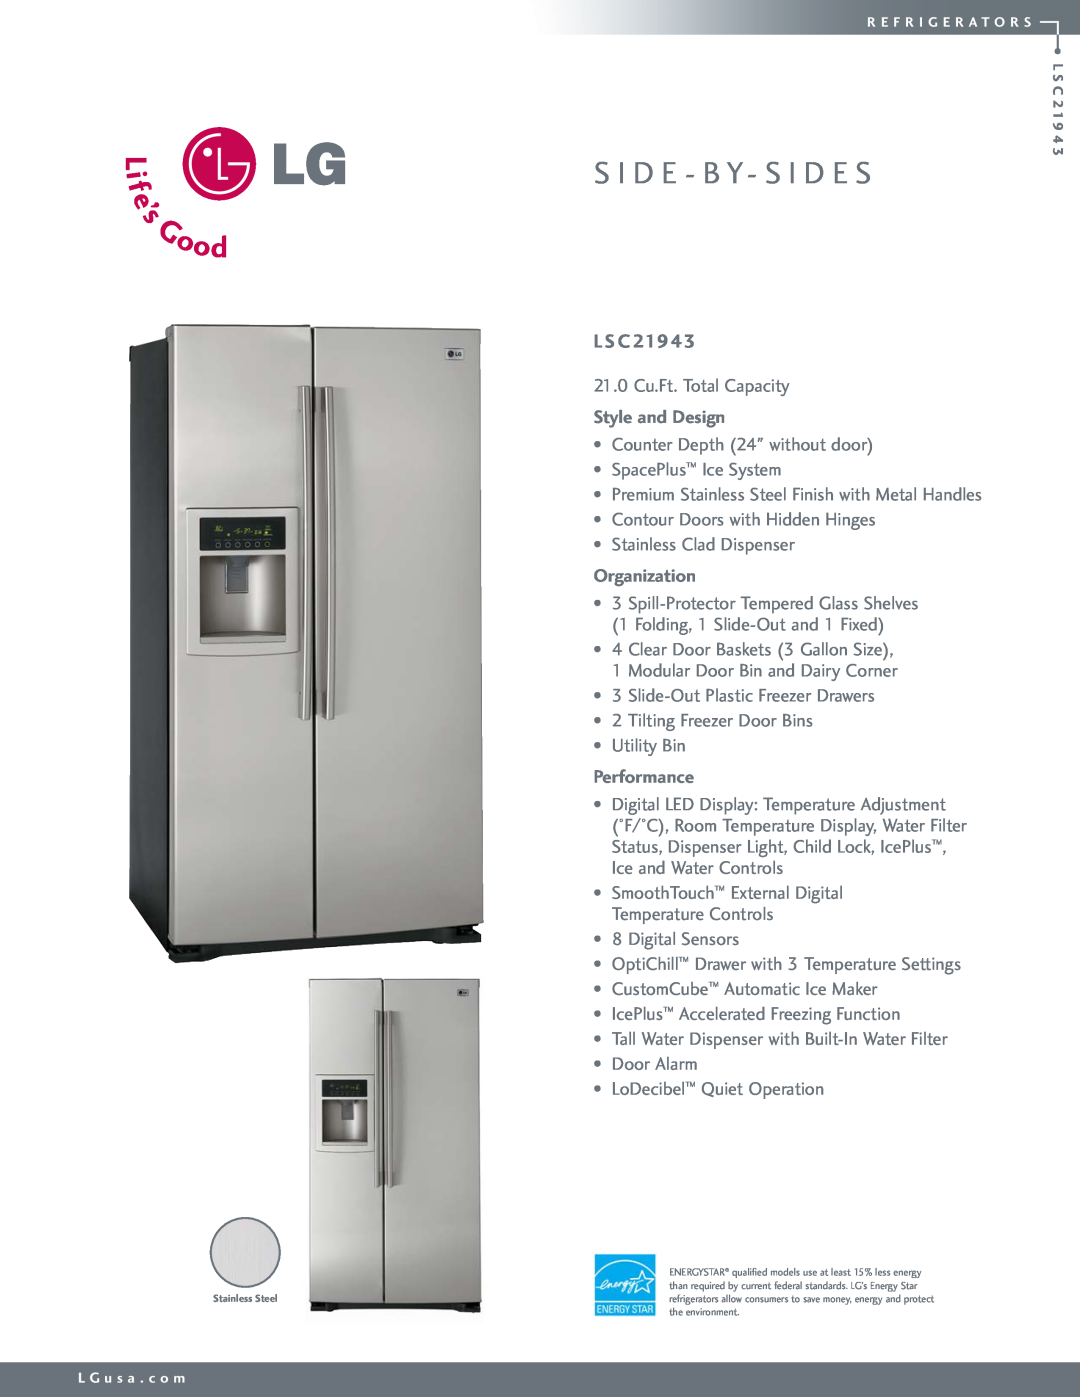 LG Electronics LSC21943 manual L S C, S I D E - B Y- S I D E S, Style and Design, Organization, Performance 